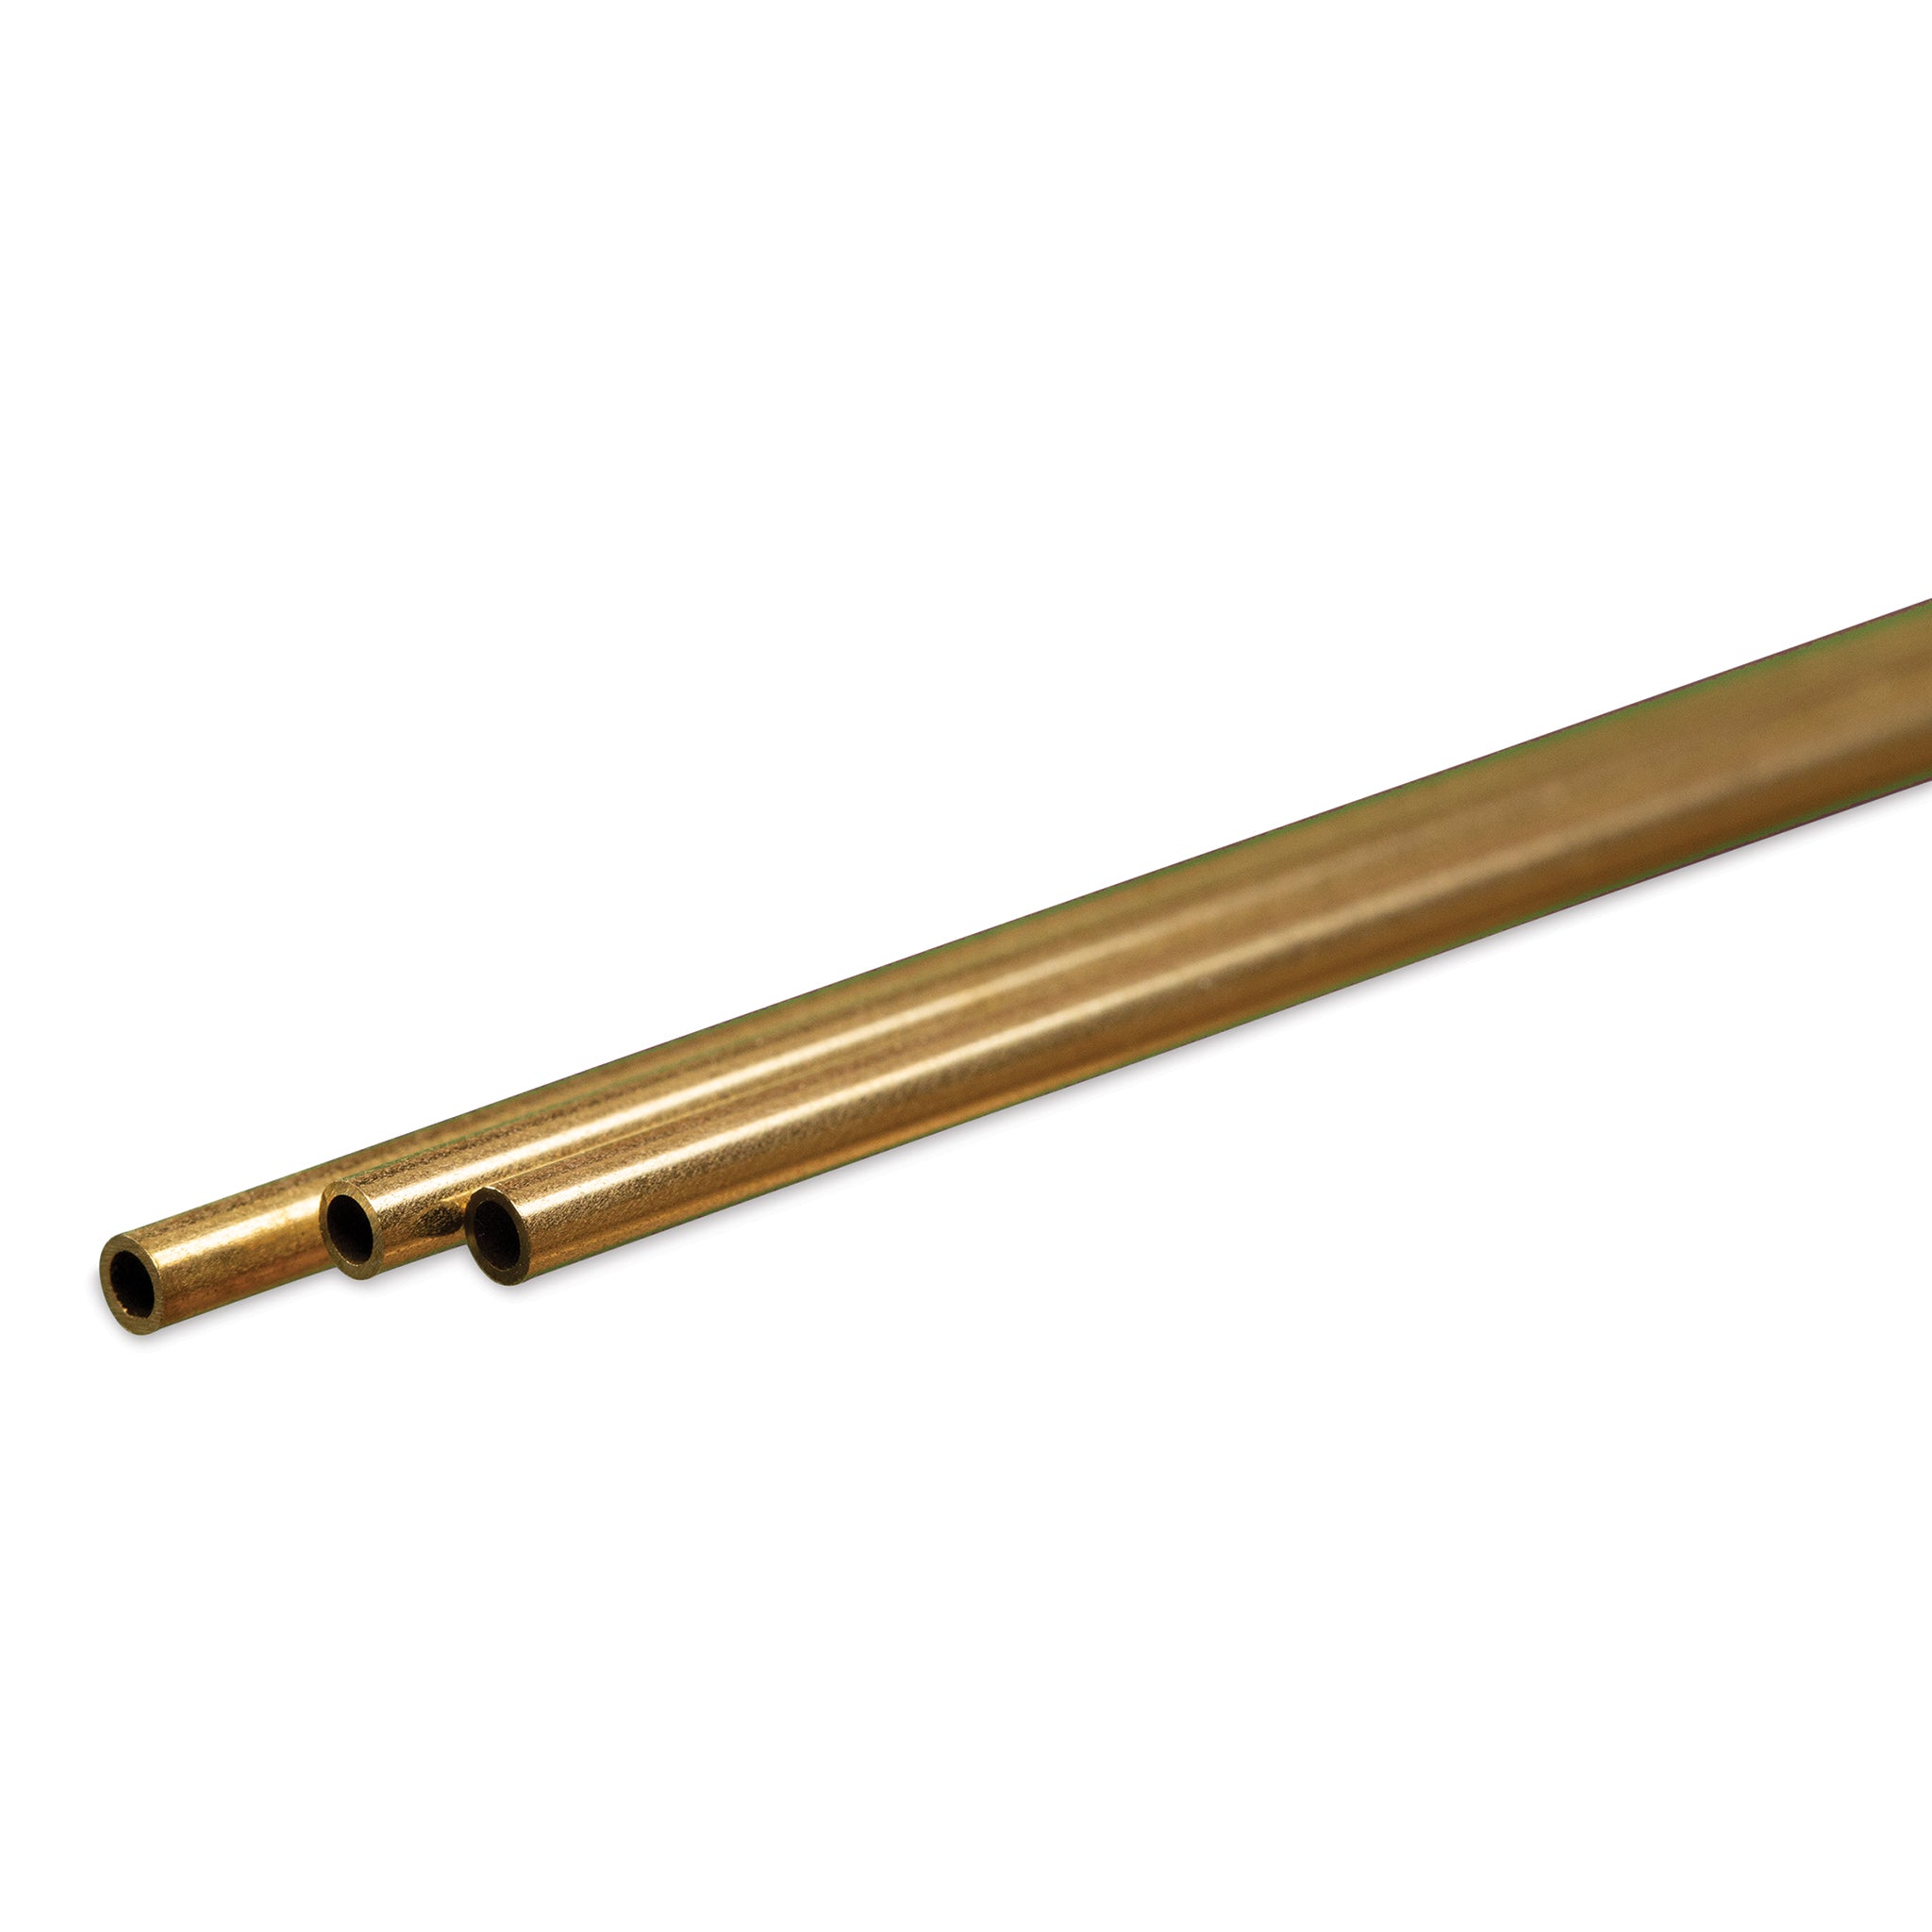 K&S Metals 8126 Round Brass Tube 3/32" OD x 0.014" Wall x 12" Long (3 Pieces)